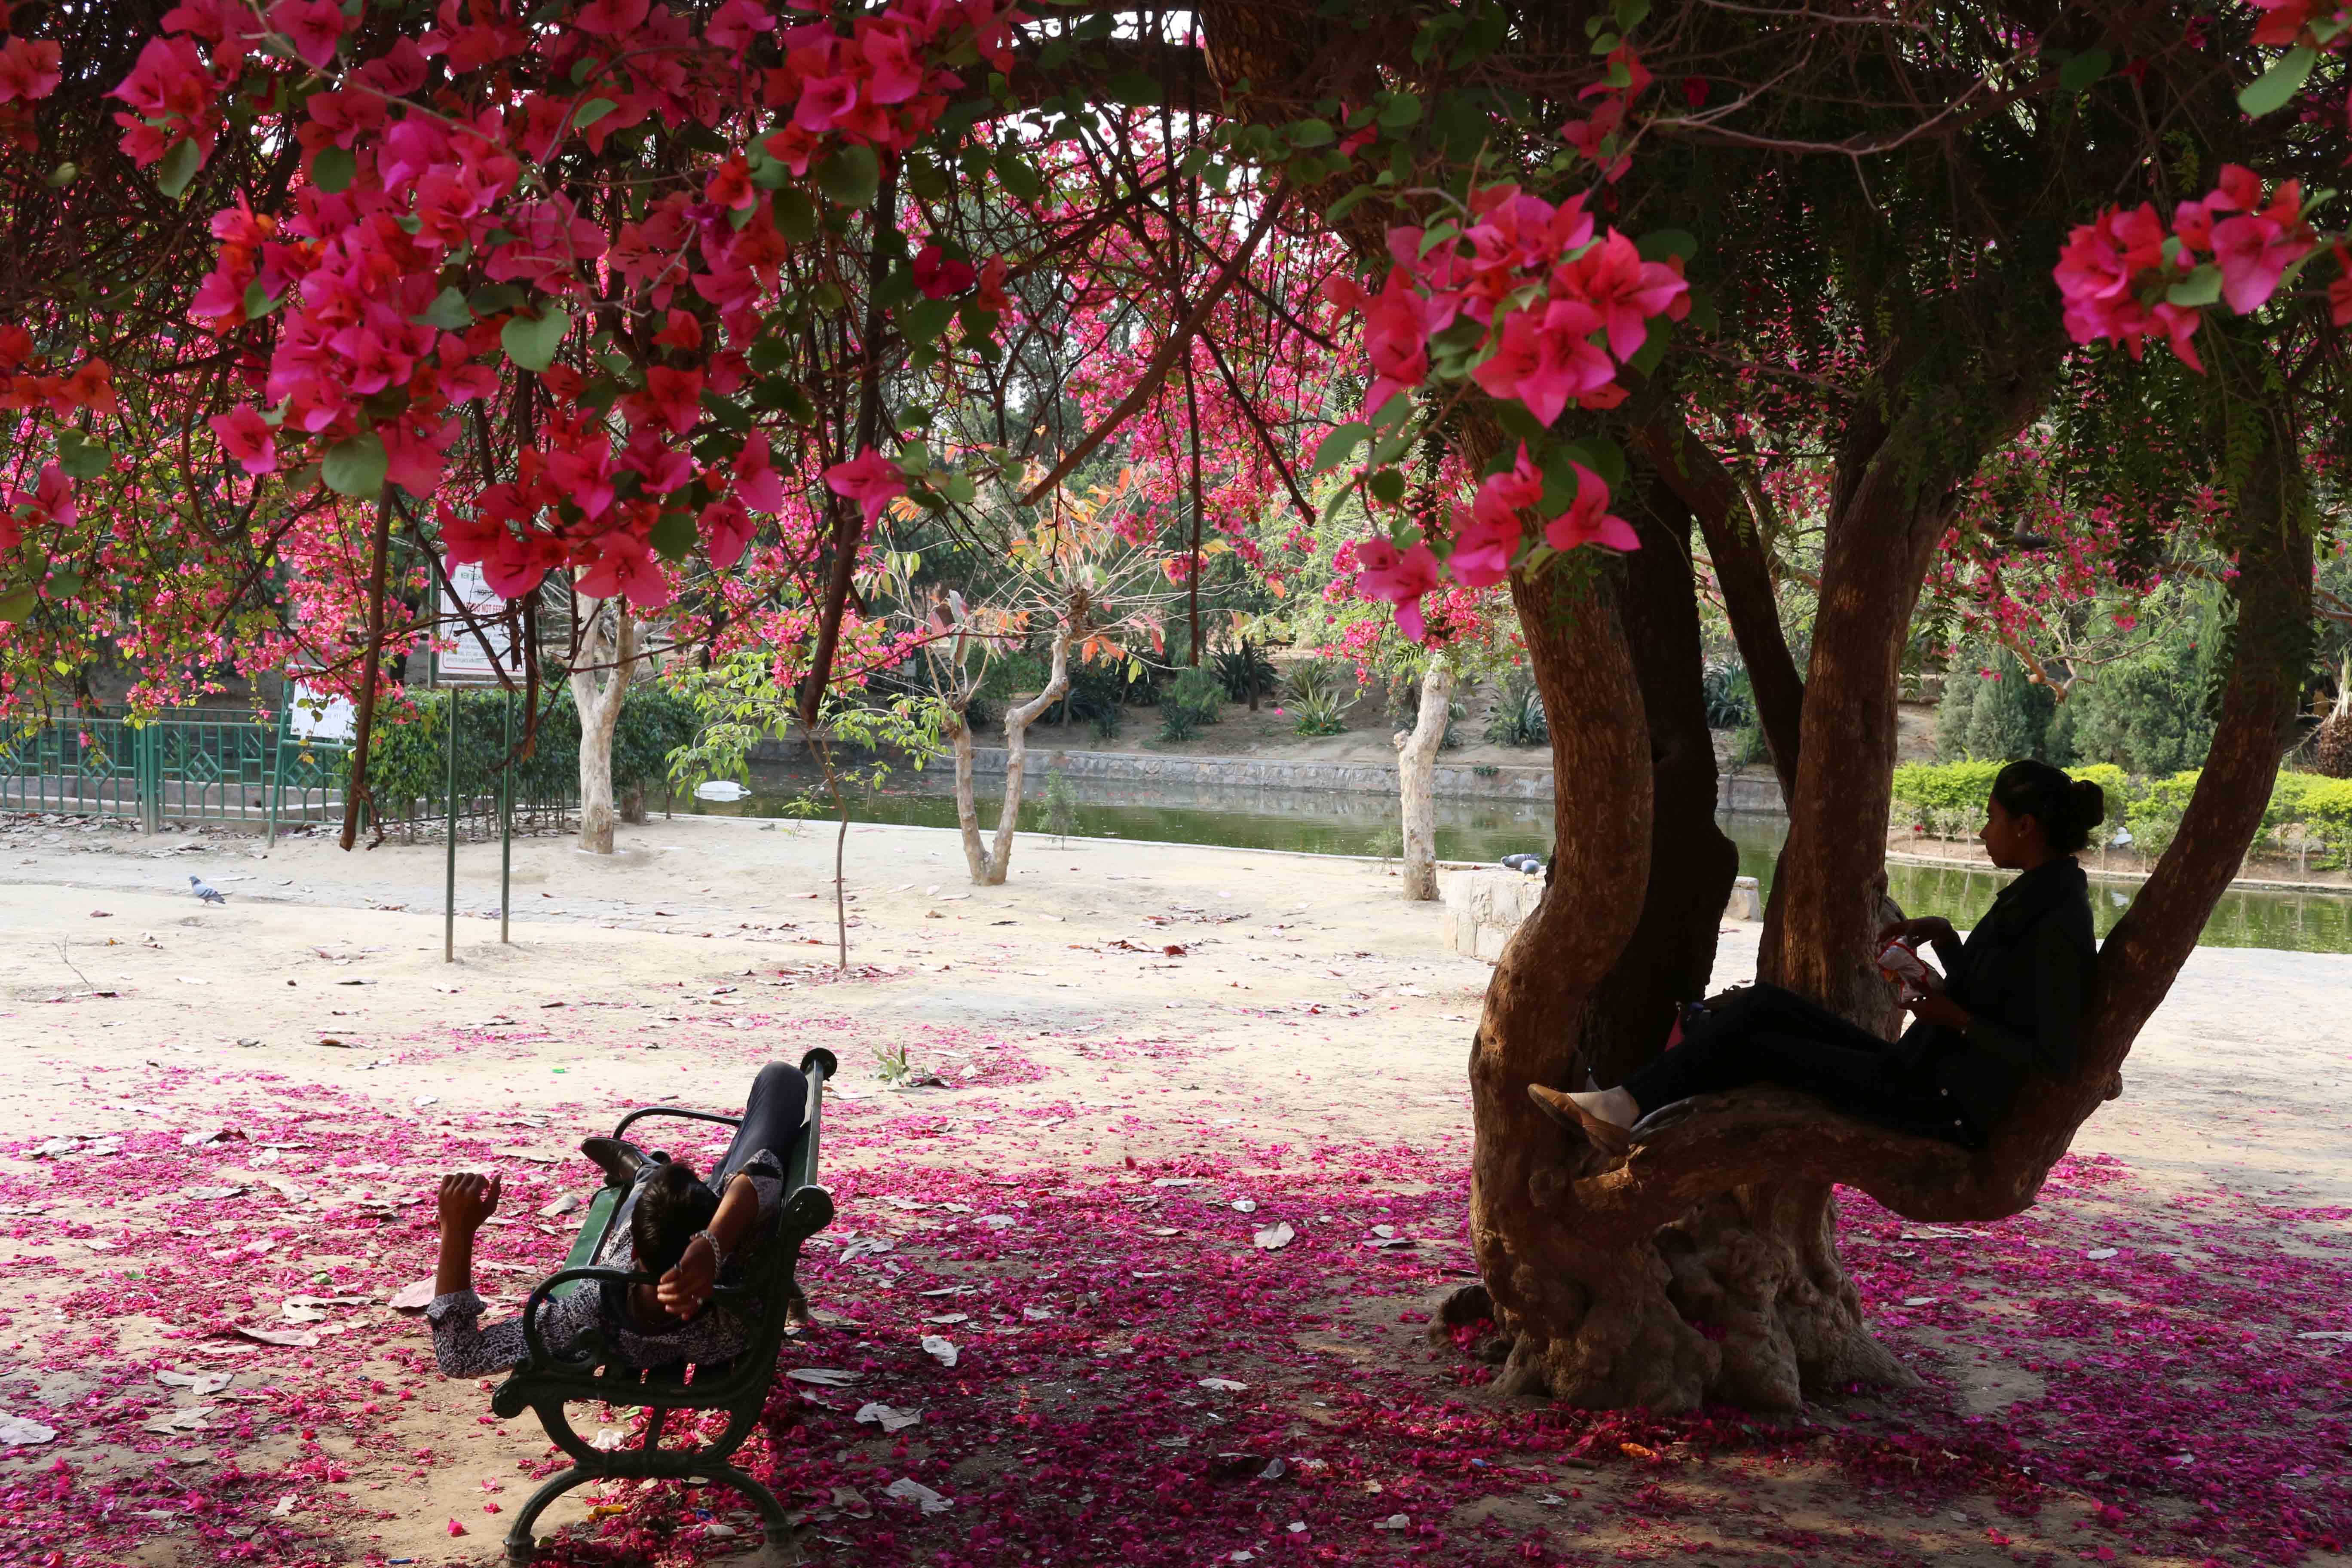 City Nature - The Two Bougainvillea Trees, Lodhi Gardens